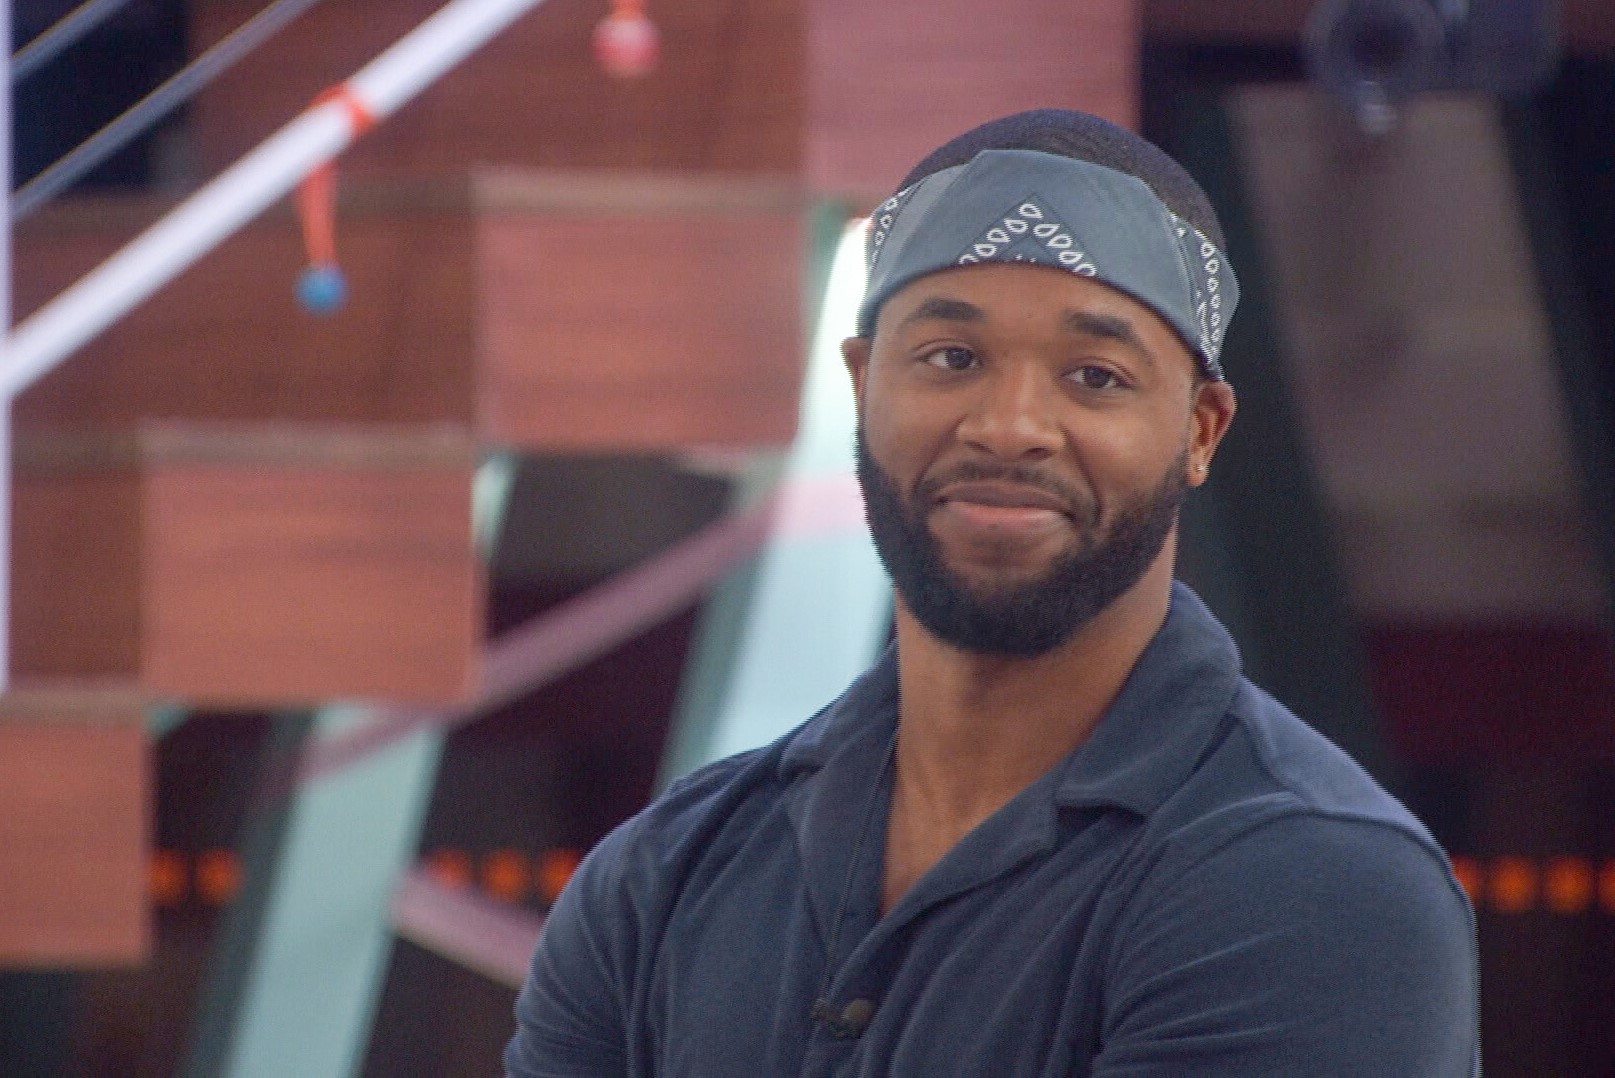 Monte Taylor, who cast the sole vote to evict in 'Big Brother 24' Episode 33